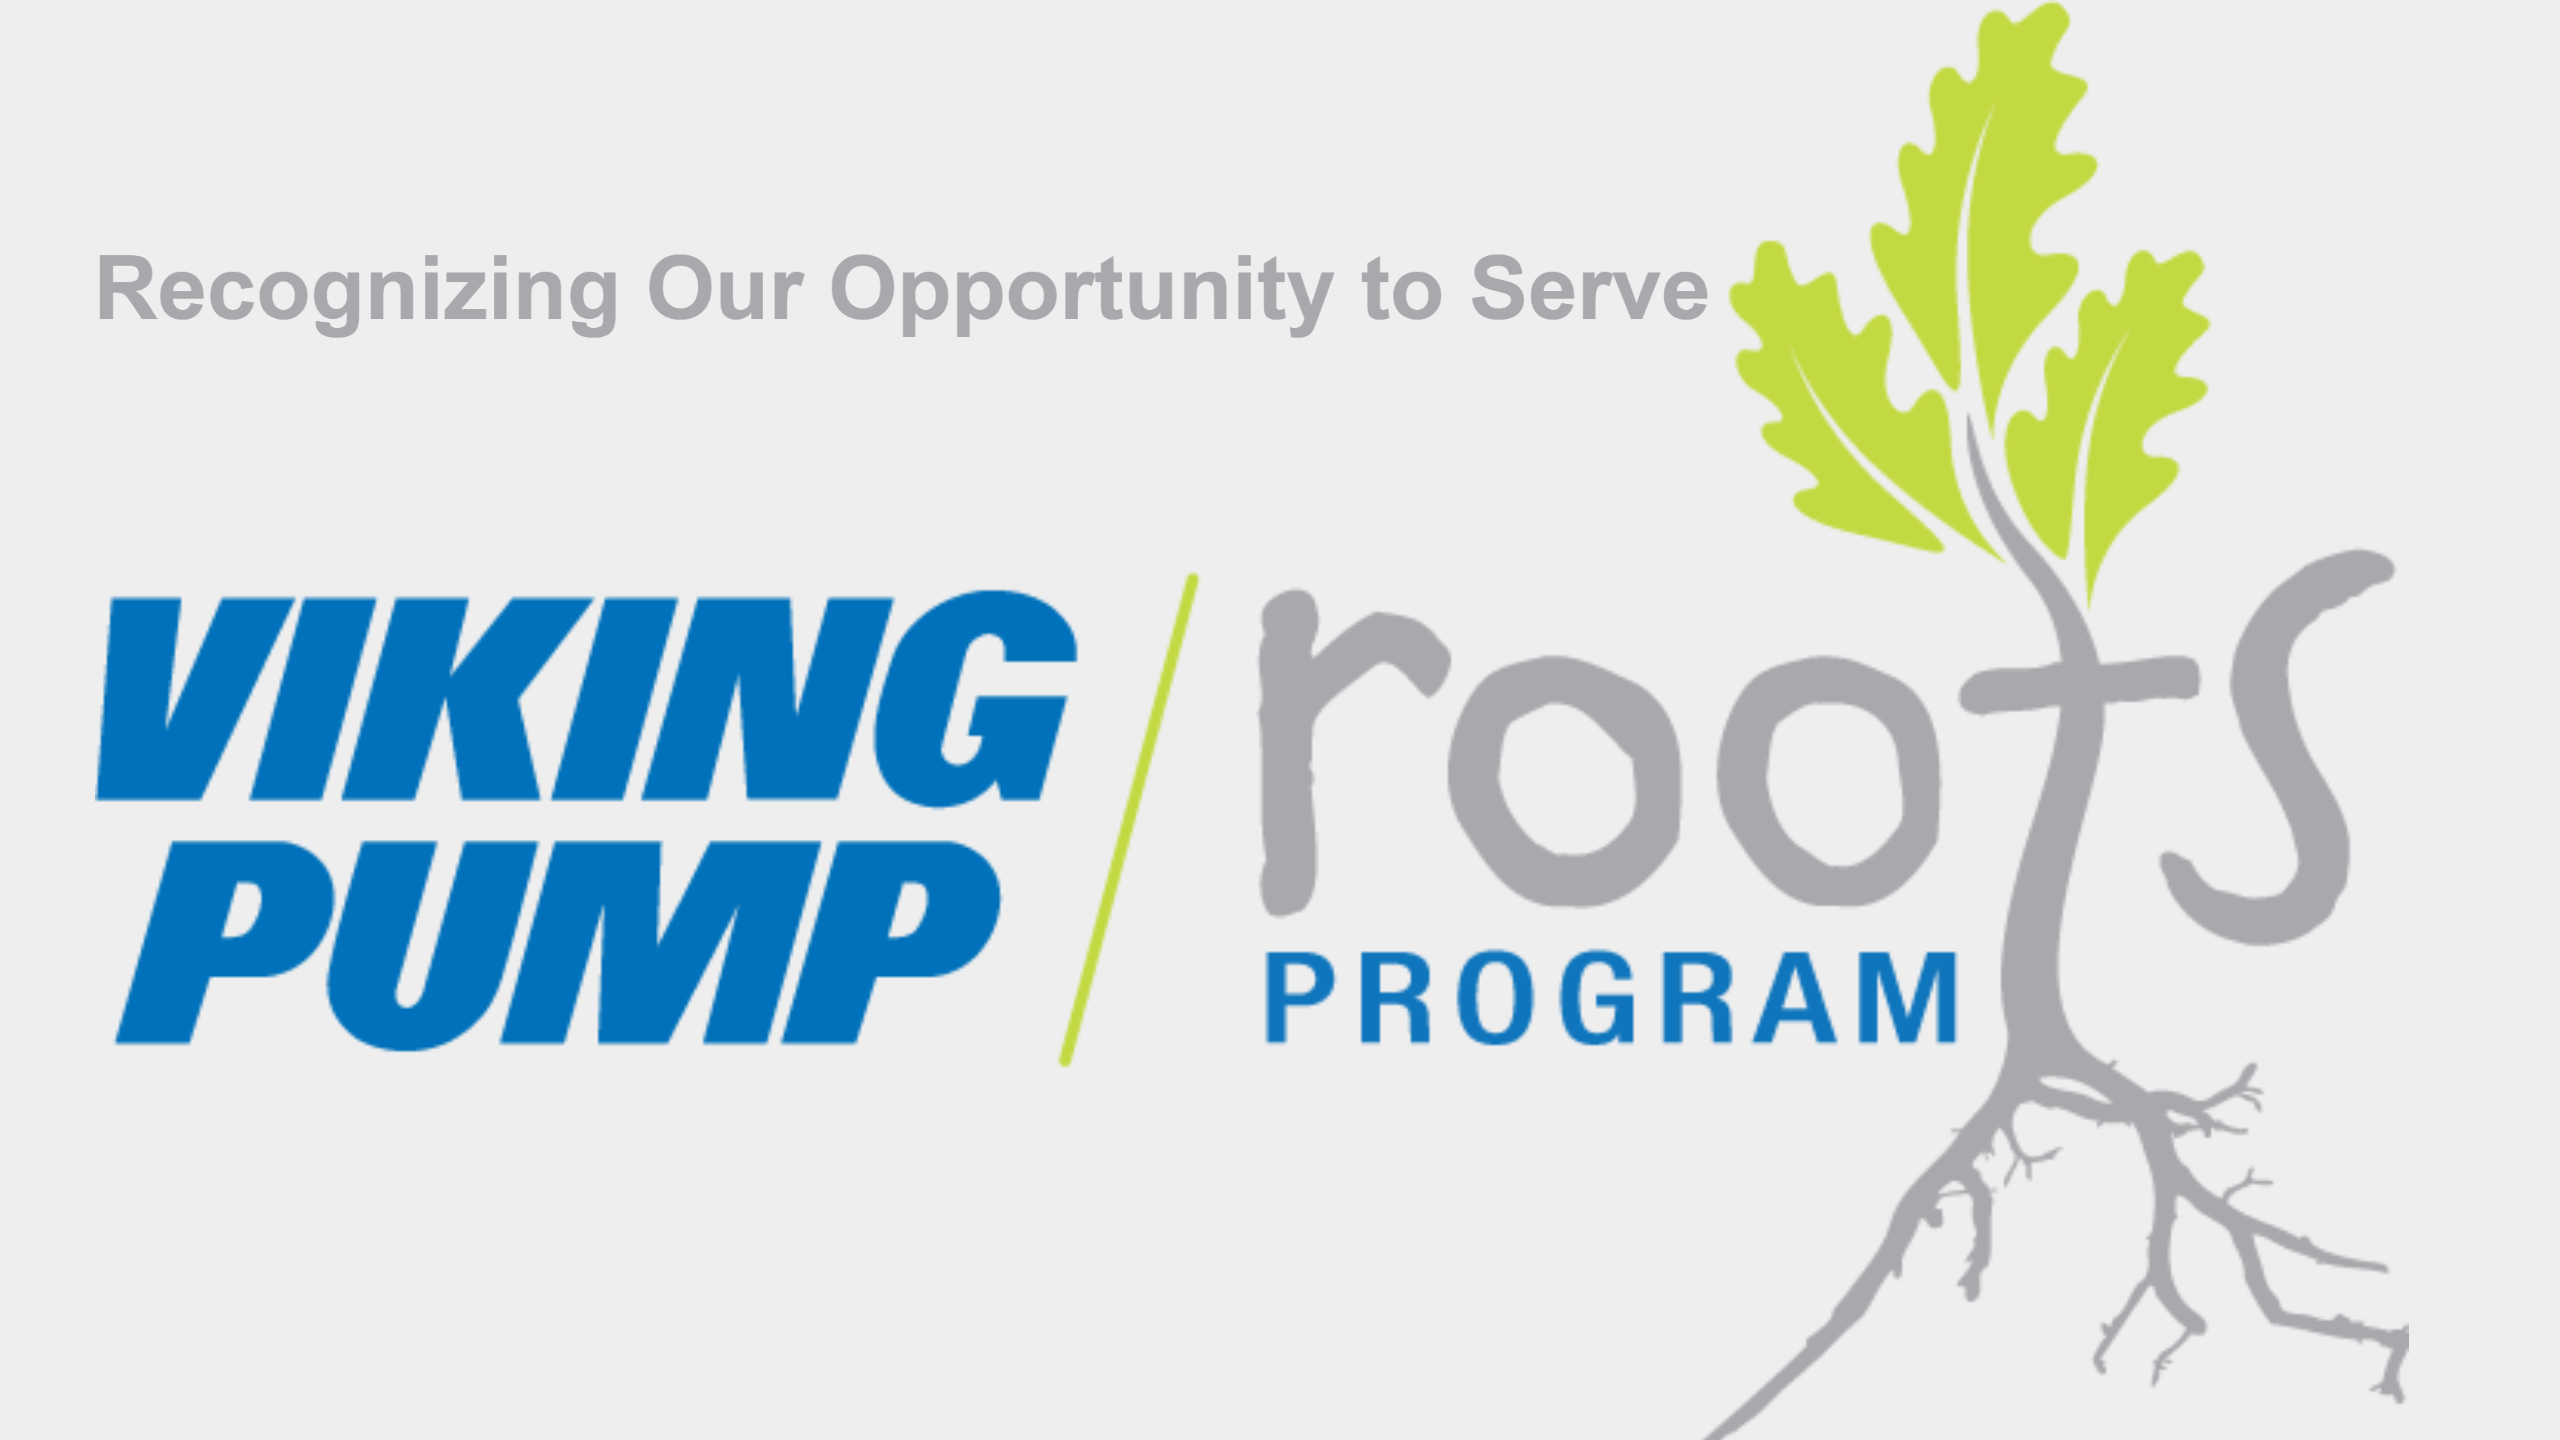 Recognizing our Opportunity to Serve ROOTS program logo